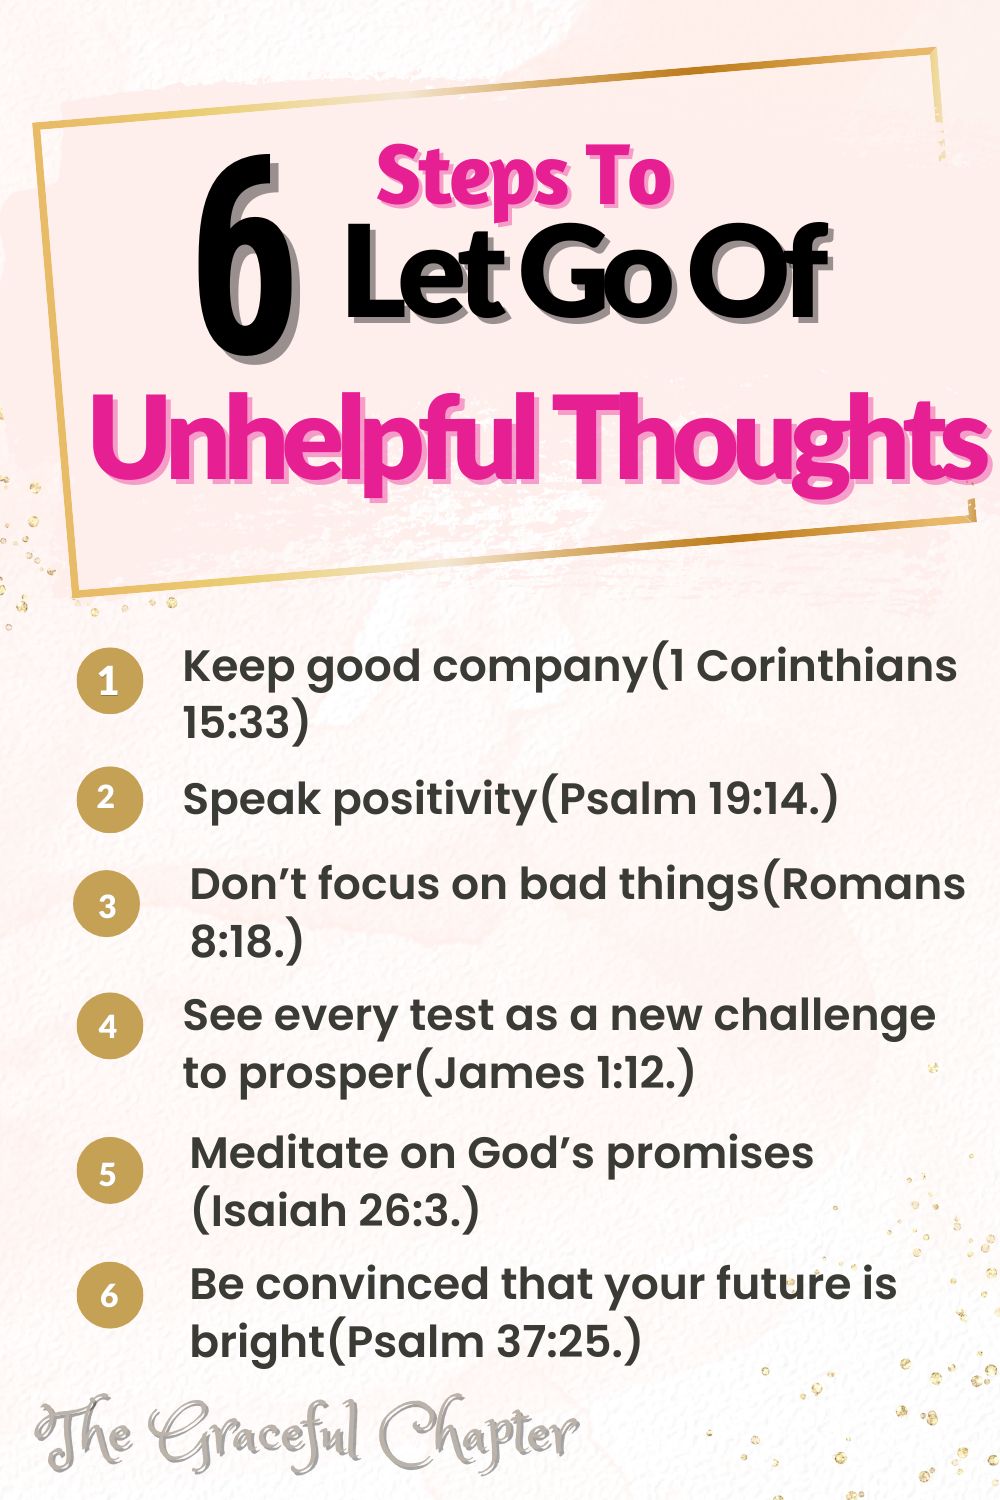 6 steps to let go of unhelpful thoughts